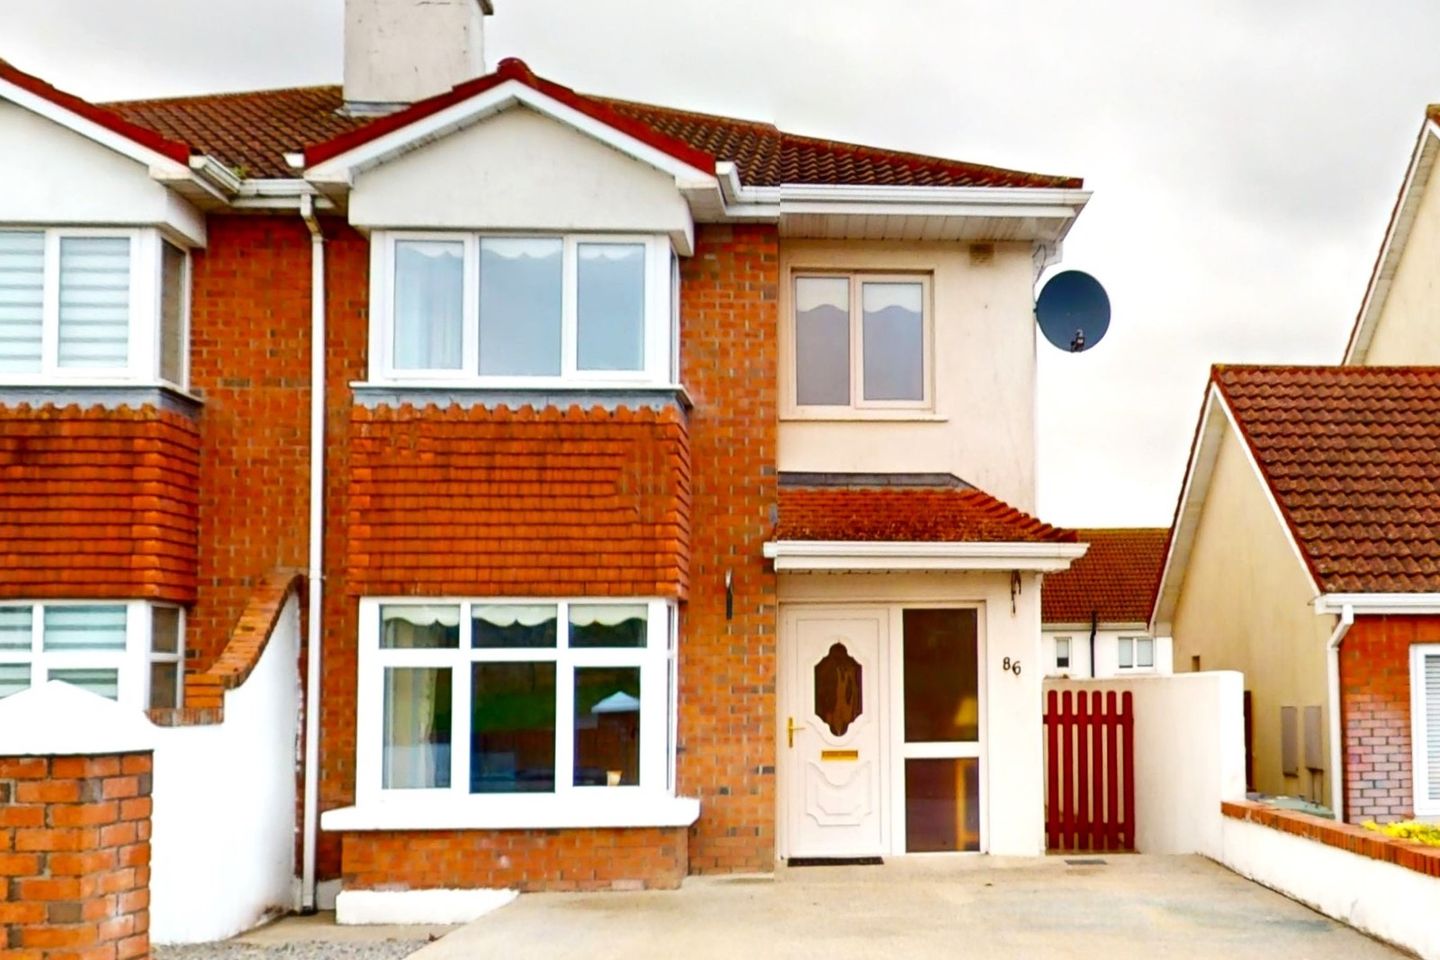 86 Conifer Road, Monvoy Valley, Tramore, Co. Waterford, X91C9N4